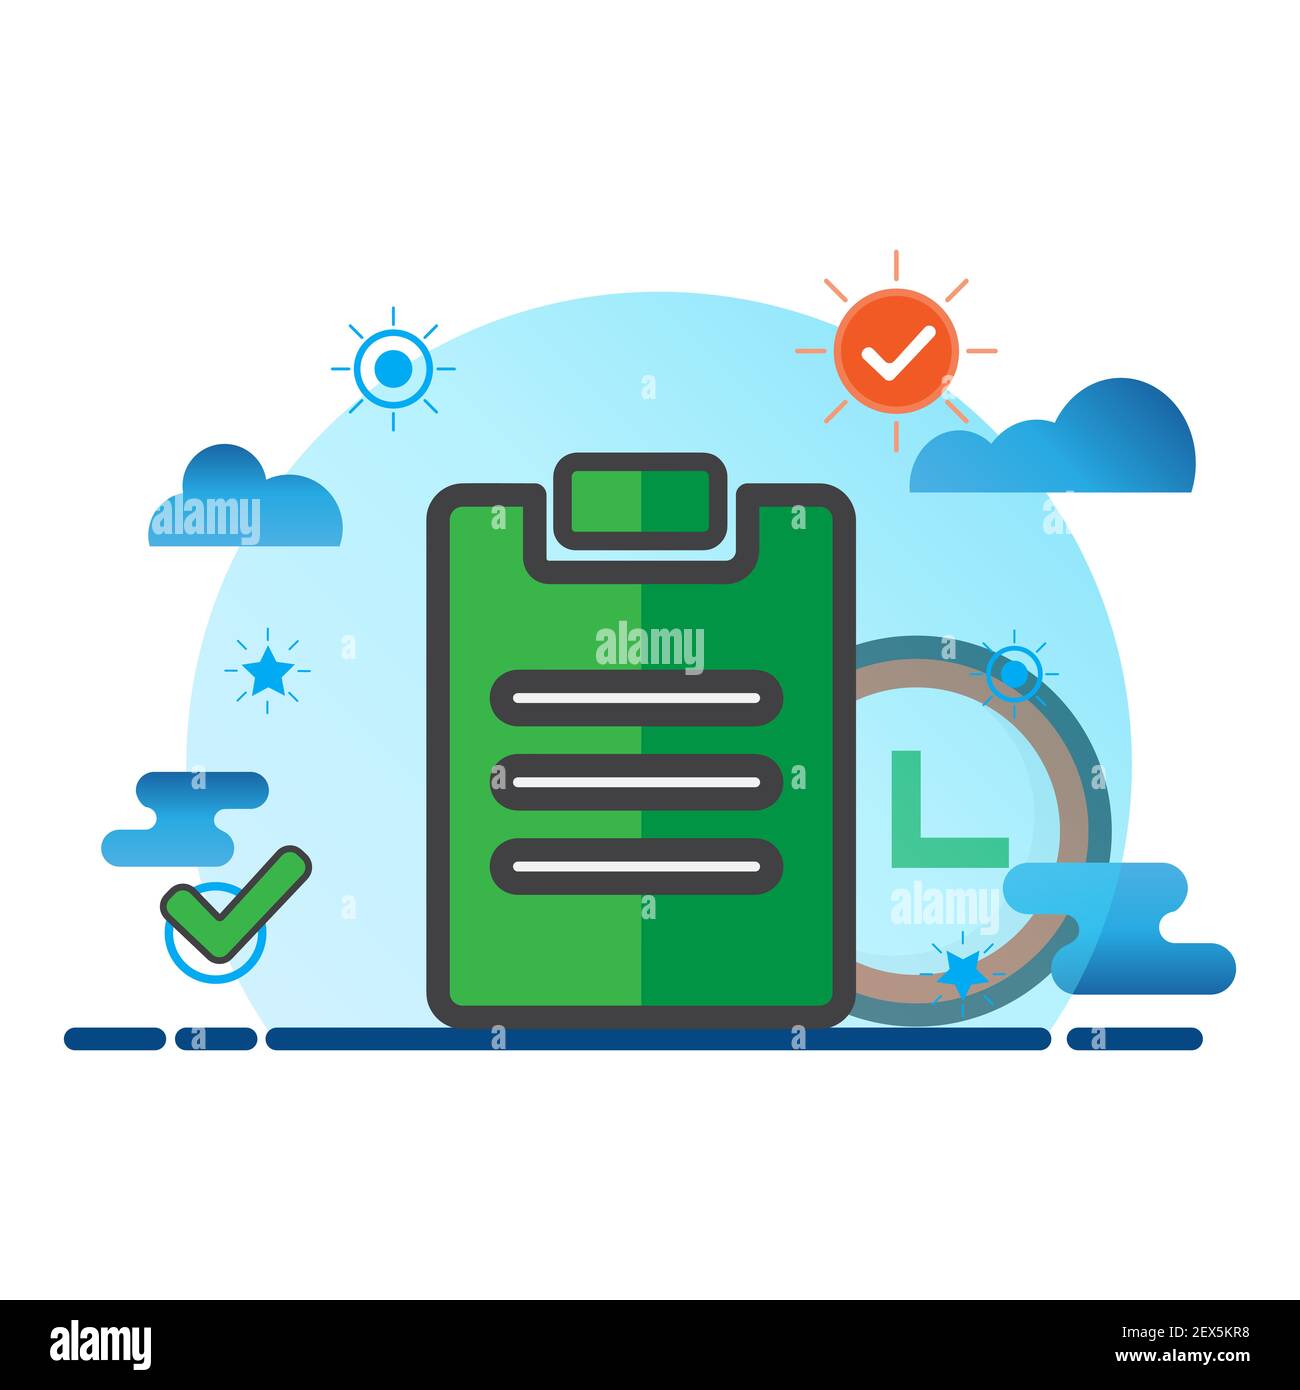 task illustration. Flat vector icon. can use for, icon design element,ui, web, app. Stock Photo